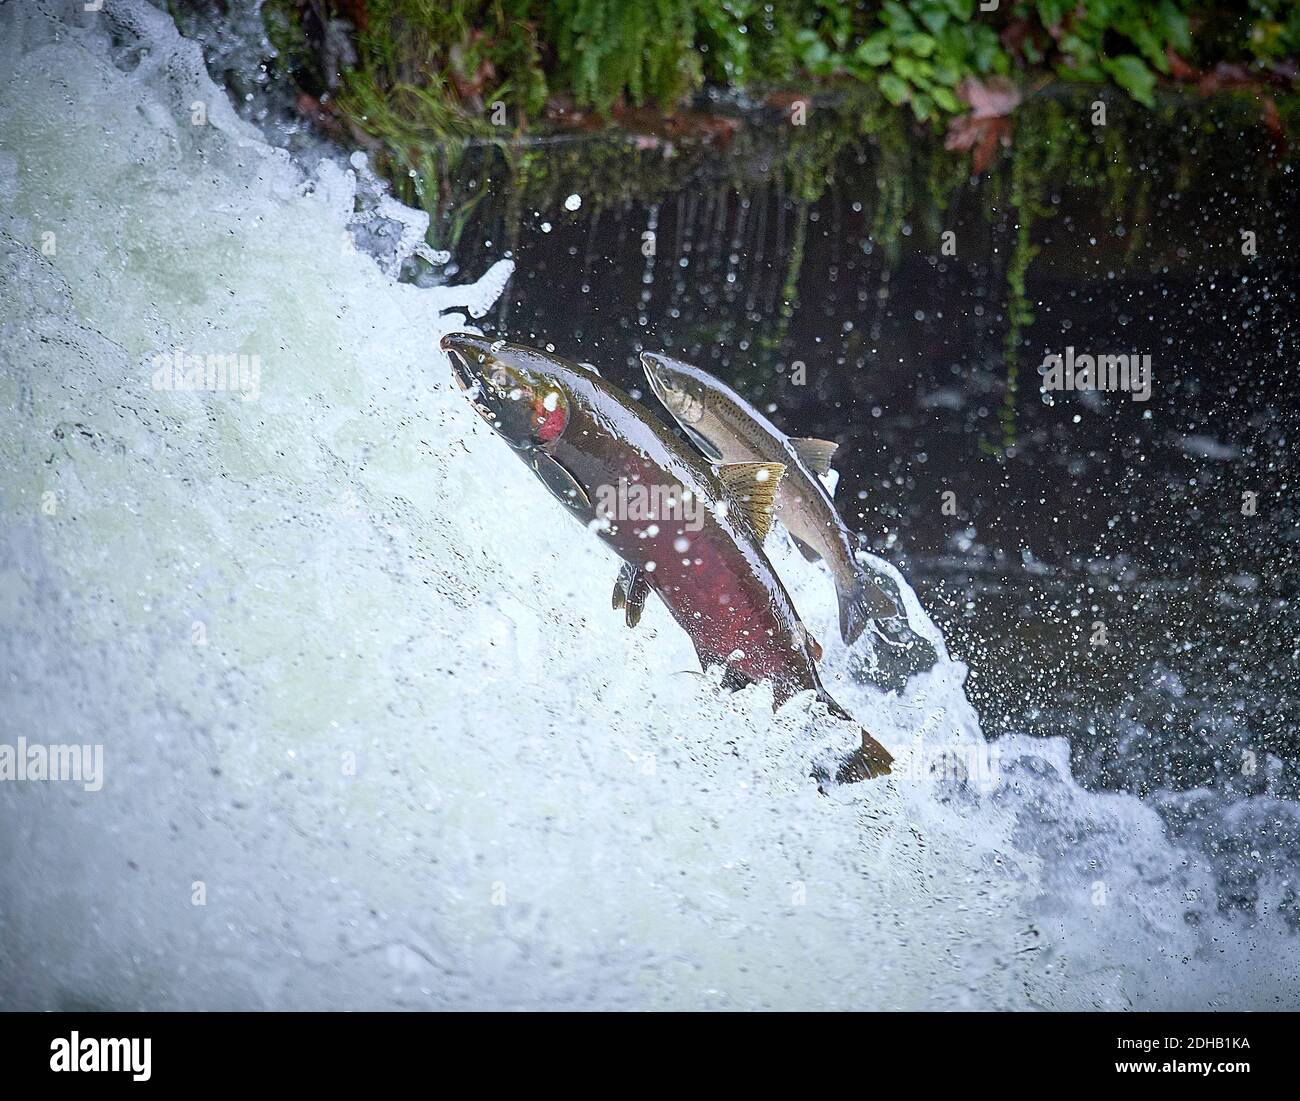 Migrating Coho salmon (Oncorhynchus kisutch) jump up Lake Creek Falls on a tributary of the Siuslaw River in western Oregon. Stock Photo